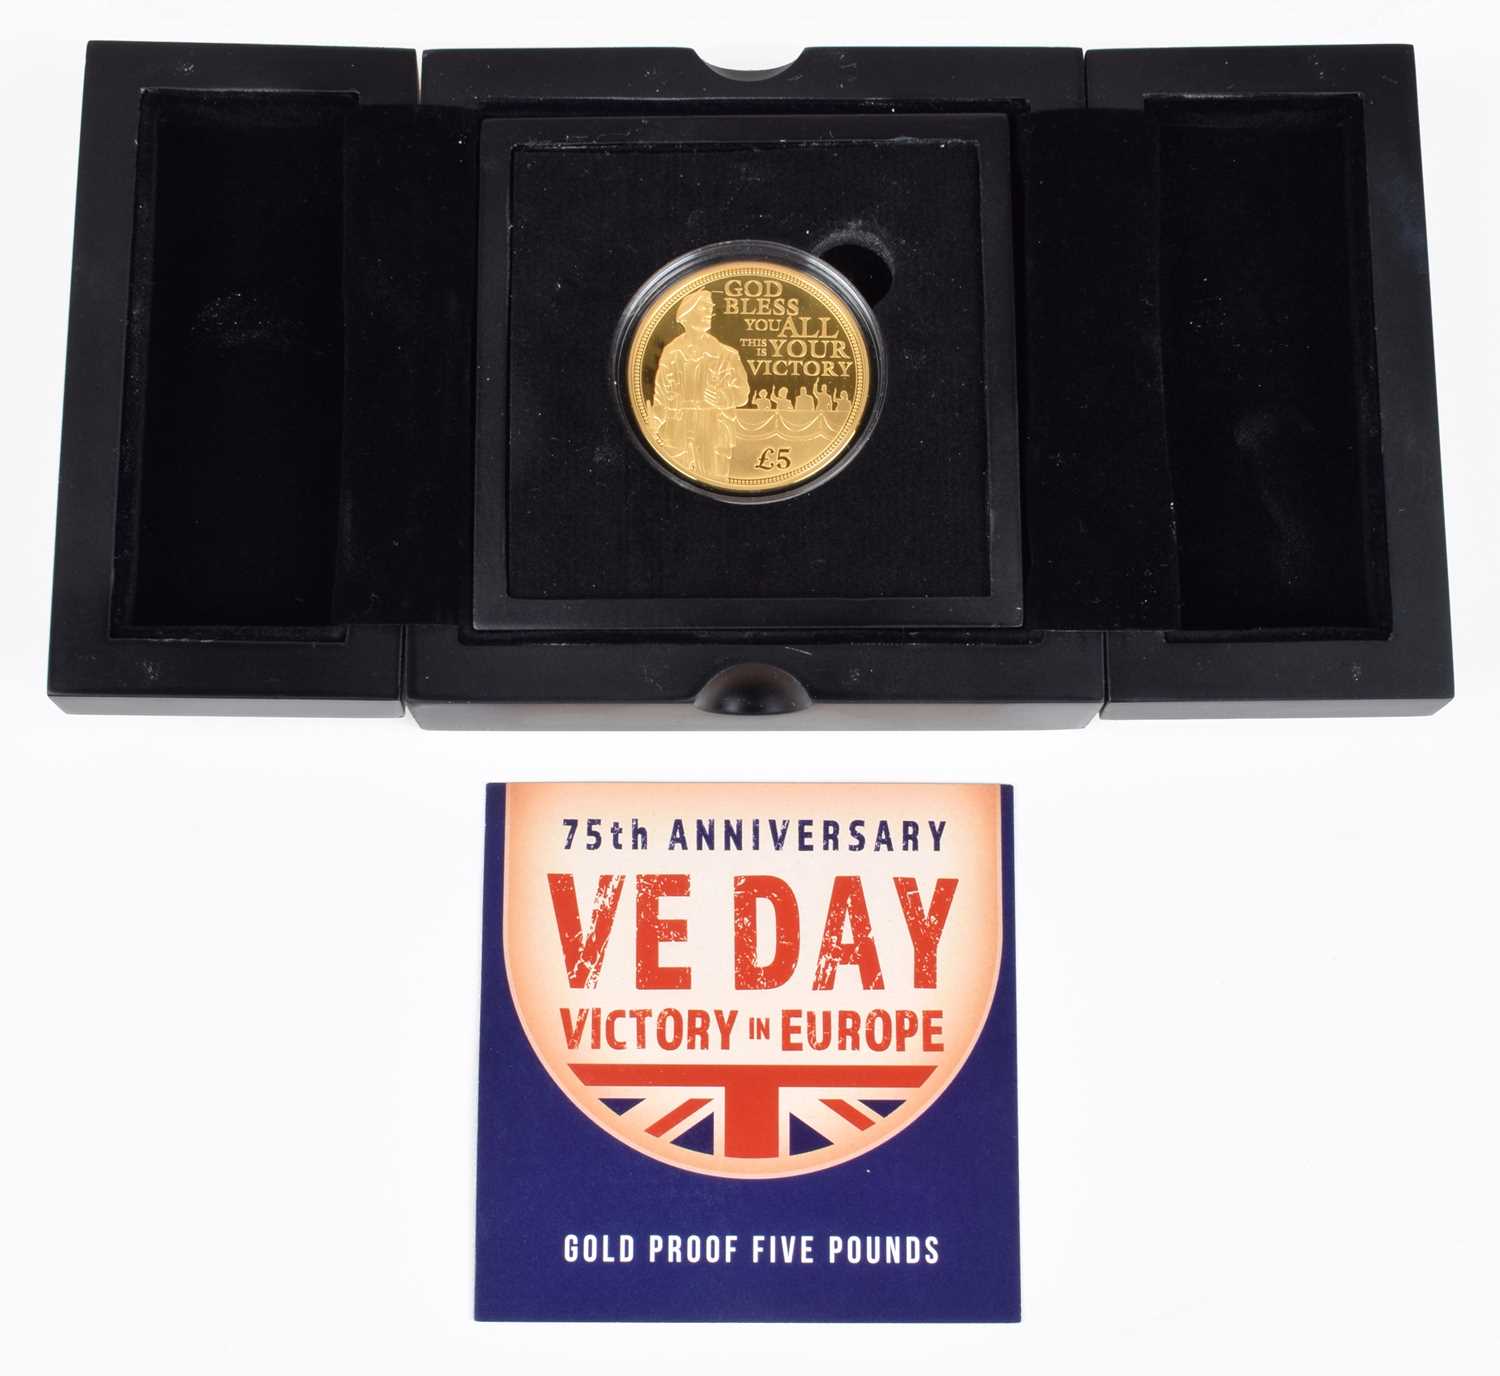 Lot Queen Elizabeth II, Five Pounds, Guernsey Gold Proof Coin, 2020, 75th Anniversary VE Day.